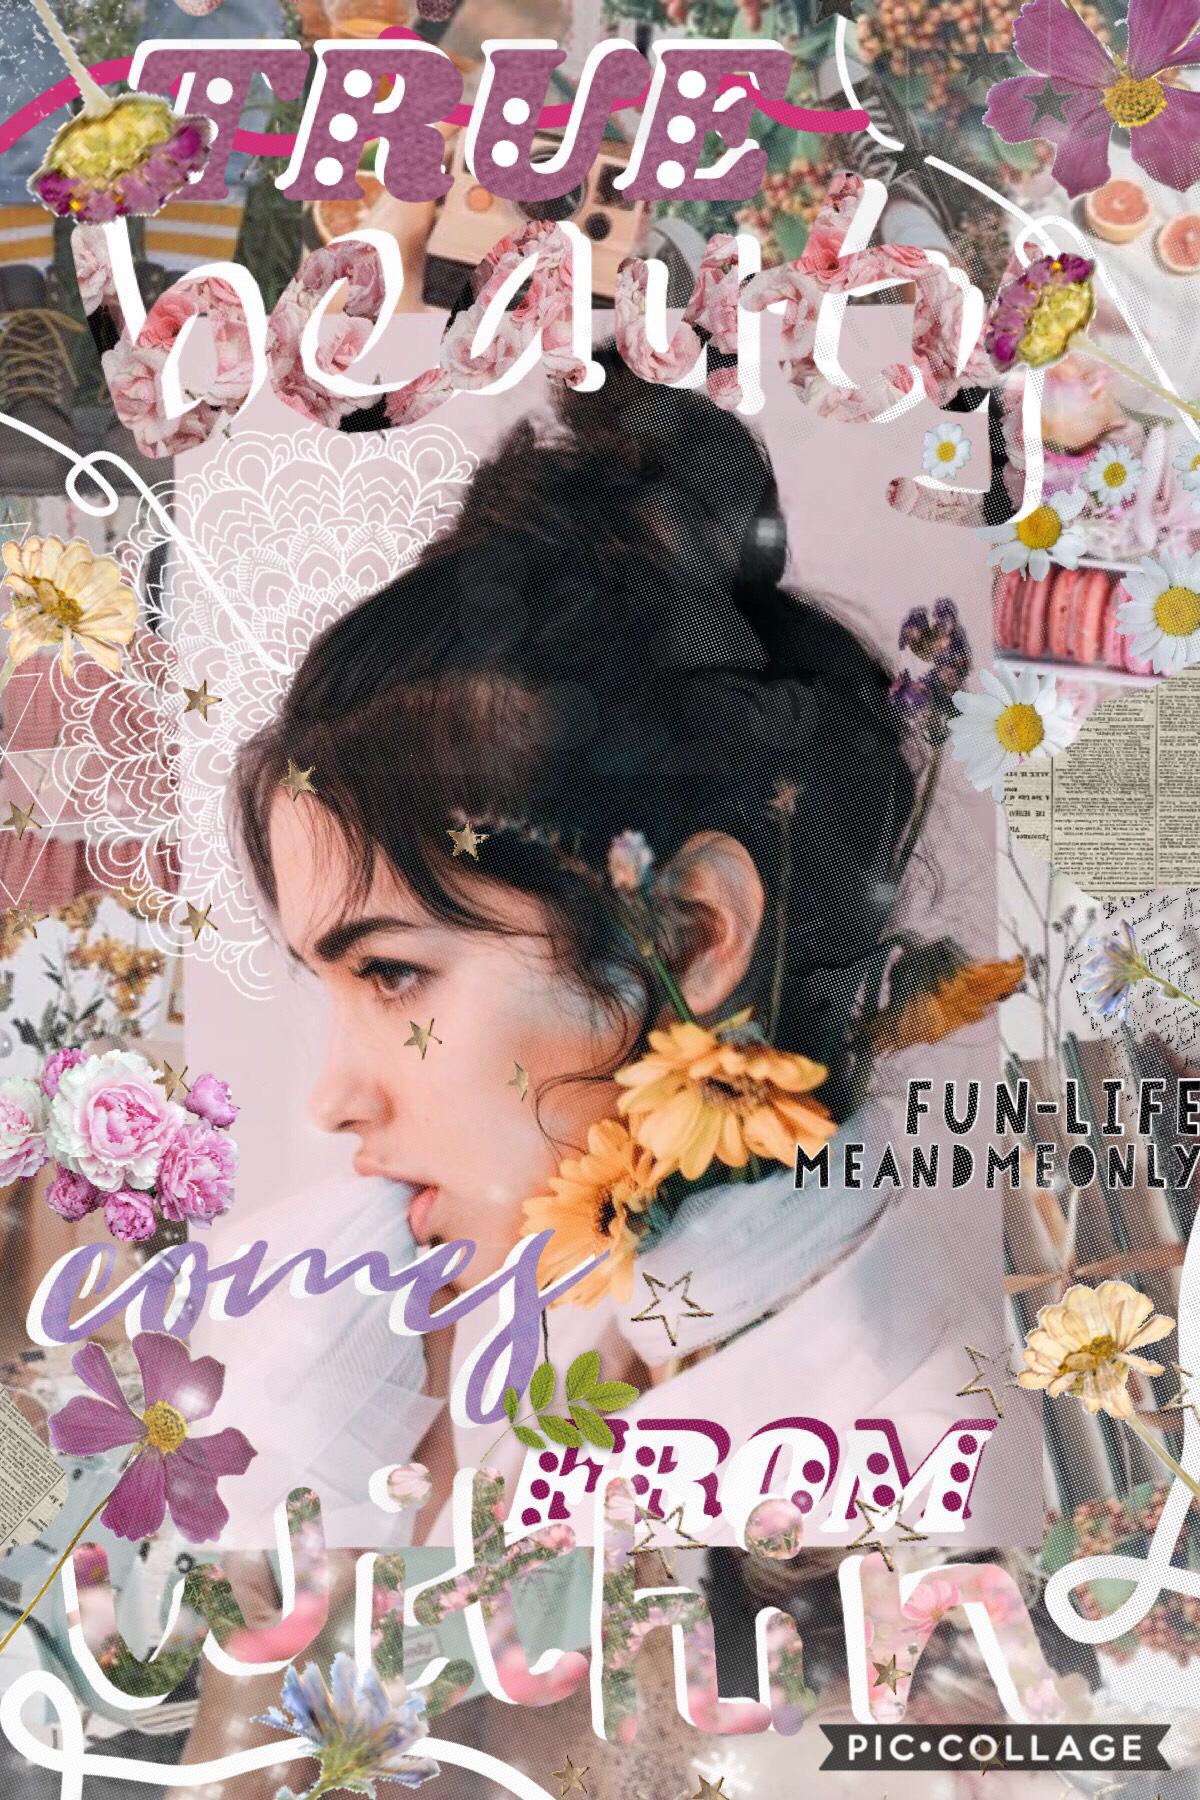 collab with the amazing and talented @fun-life!! everyone go follow her💓🥳 I did the text and designs while she did the awesome backgrounds!✨🌿 ooft i gotta make a collage with the new fonts soon🌸✨ anyway how’s everyone’s day? anyone wanna chat💘💫